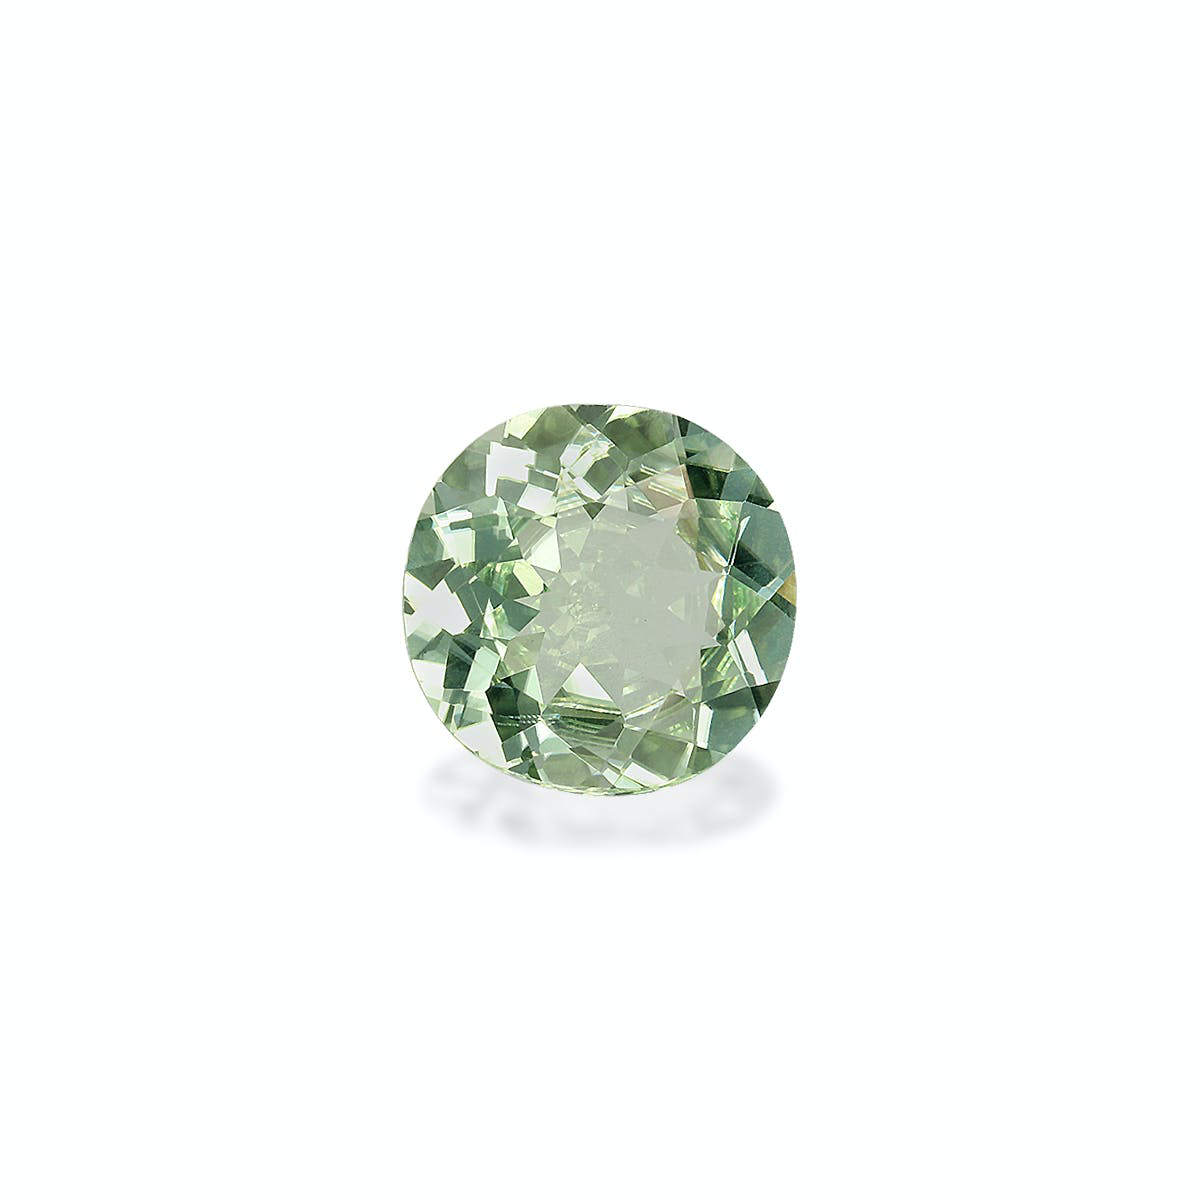 Picture of Pale Green Paraiba Tourmaline 1.25ct - 7mm (PA1568)